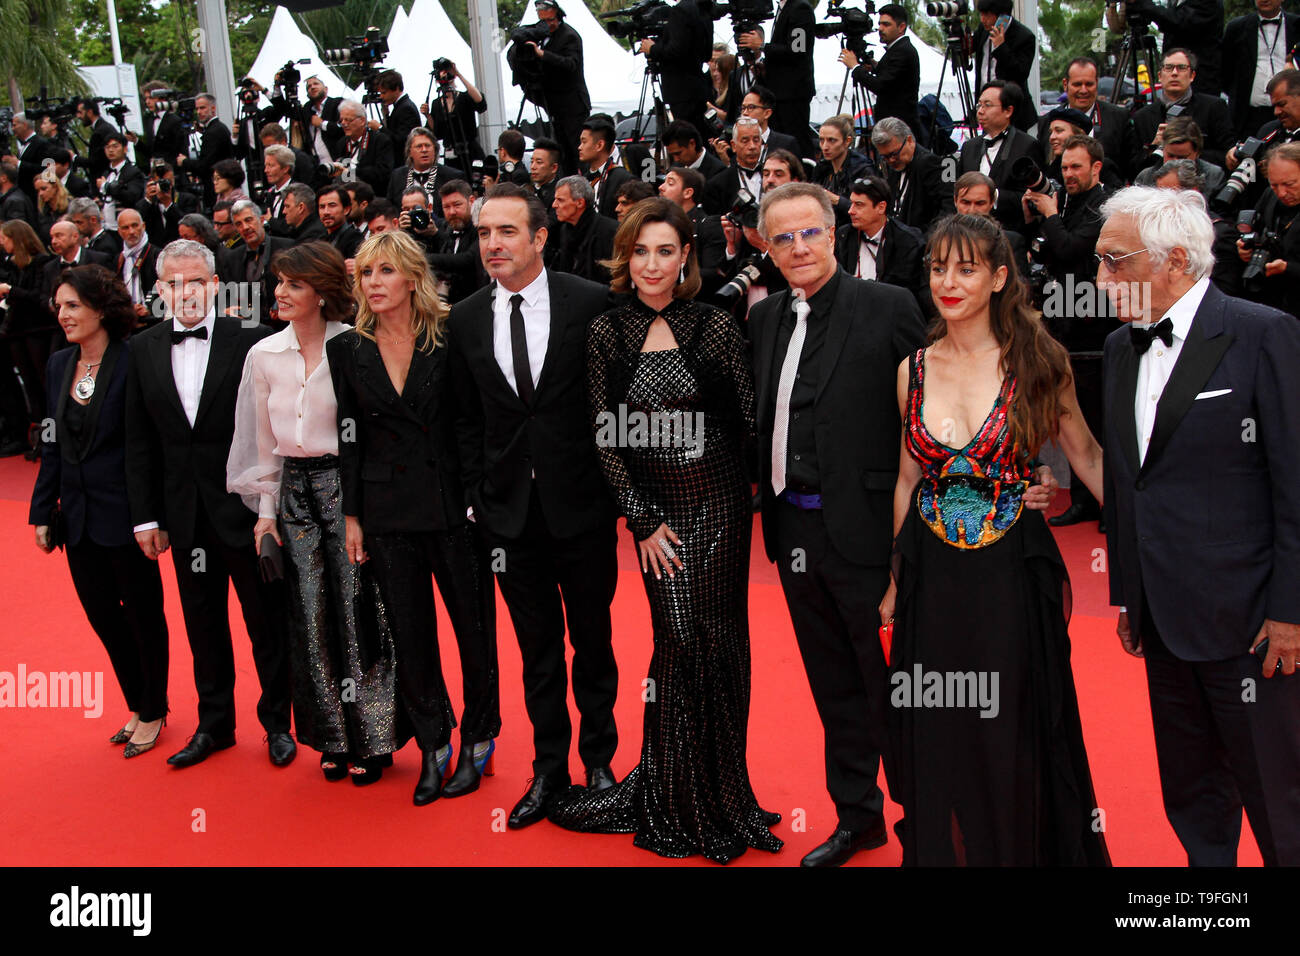 Cannes, France. 18th May, 2019. Mathilde Seignier, Jean Dujardin, Elsa Zilberstein, Christophe Lambert, Gerard Darmon, Irene Jacob and Audrey Dana  arrives to the premiere of 'LES PLUS BELLES ANNÉES D’UNE VIE' during the 2019 Cannes Film Festival on May 18, 2019 at Palais des Festivals in Cannes, France. Credit: Imagespace/Alamy Live News Stock Photo